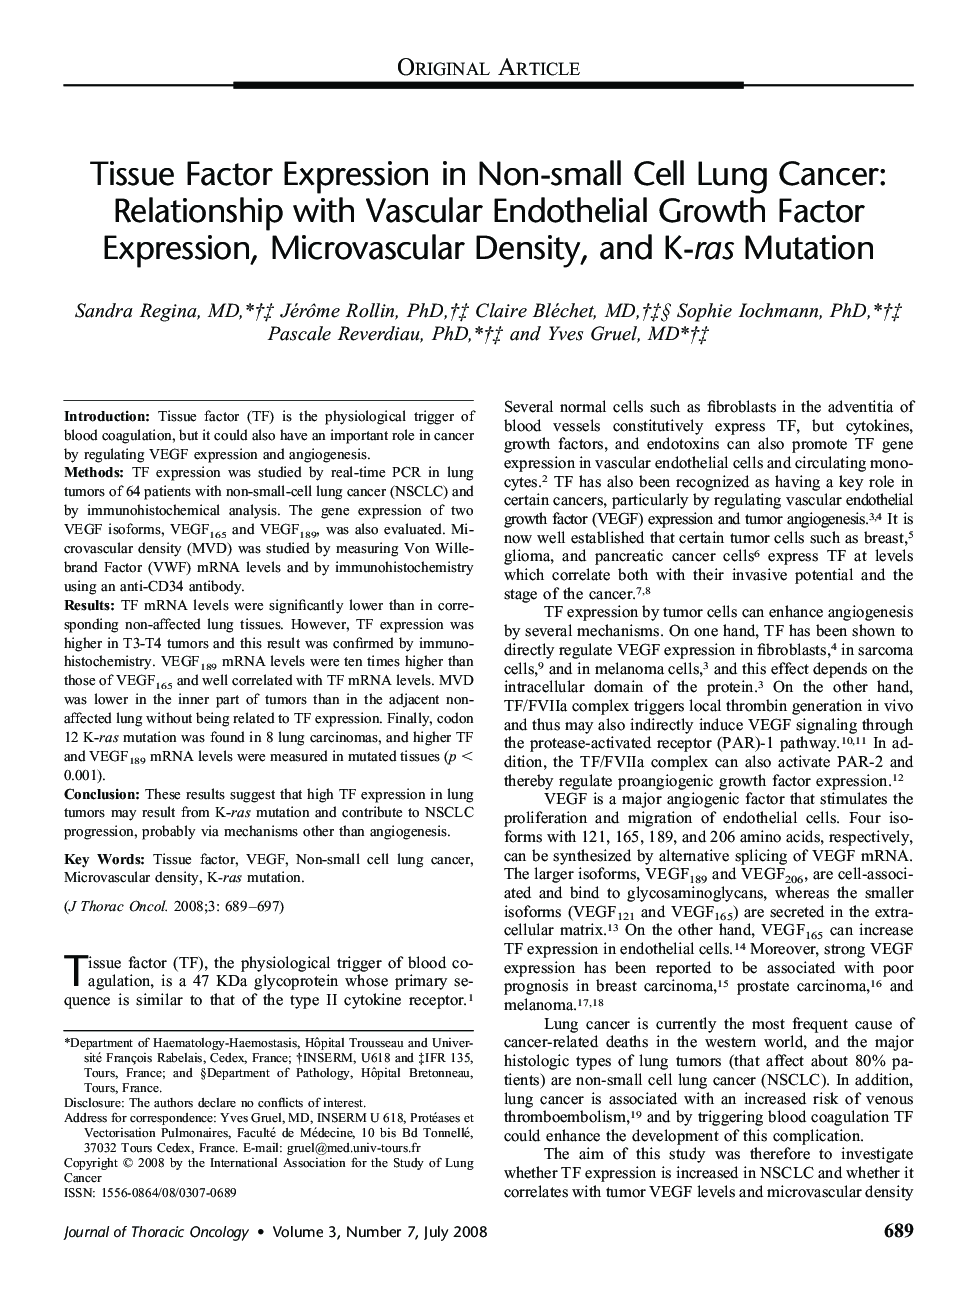 Tissue Factor Expression in Non-small Cell Lung Cancer: Relationship with Vascular Endothelial Growth Factor Expression, Microvascular Density, and K-ras Mutation 